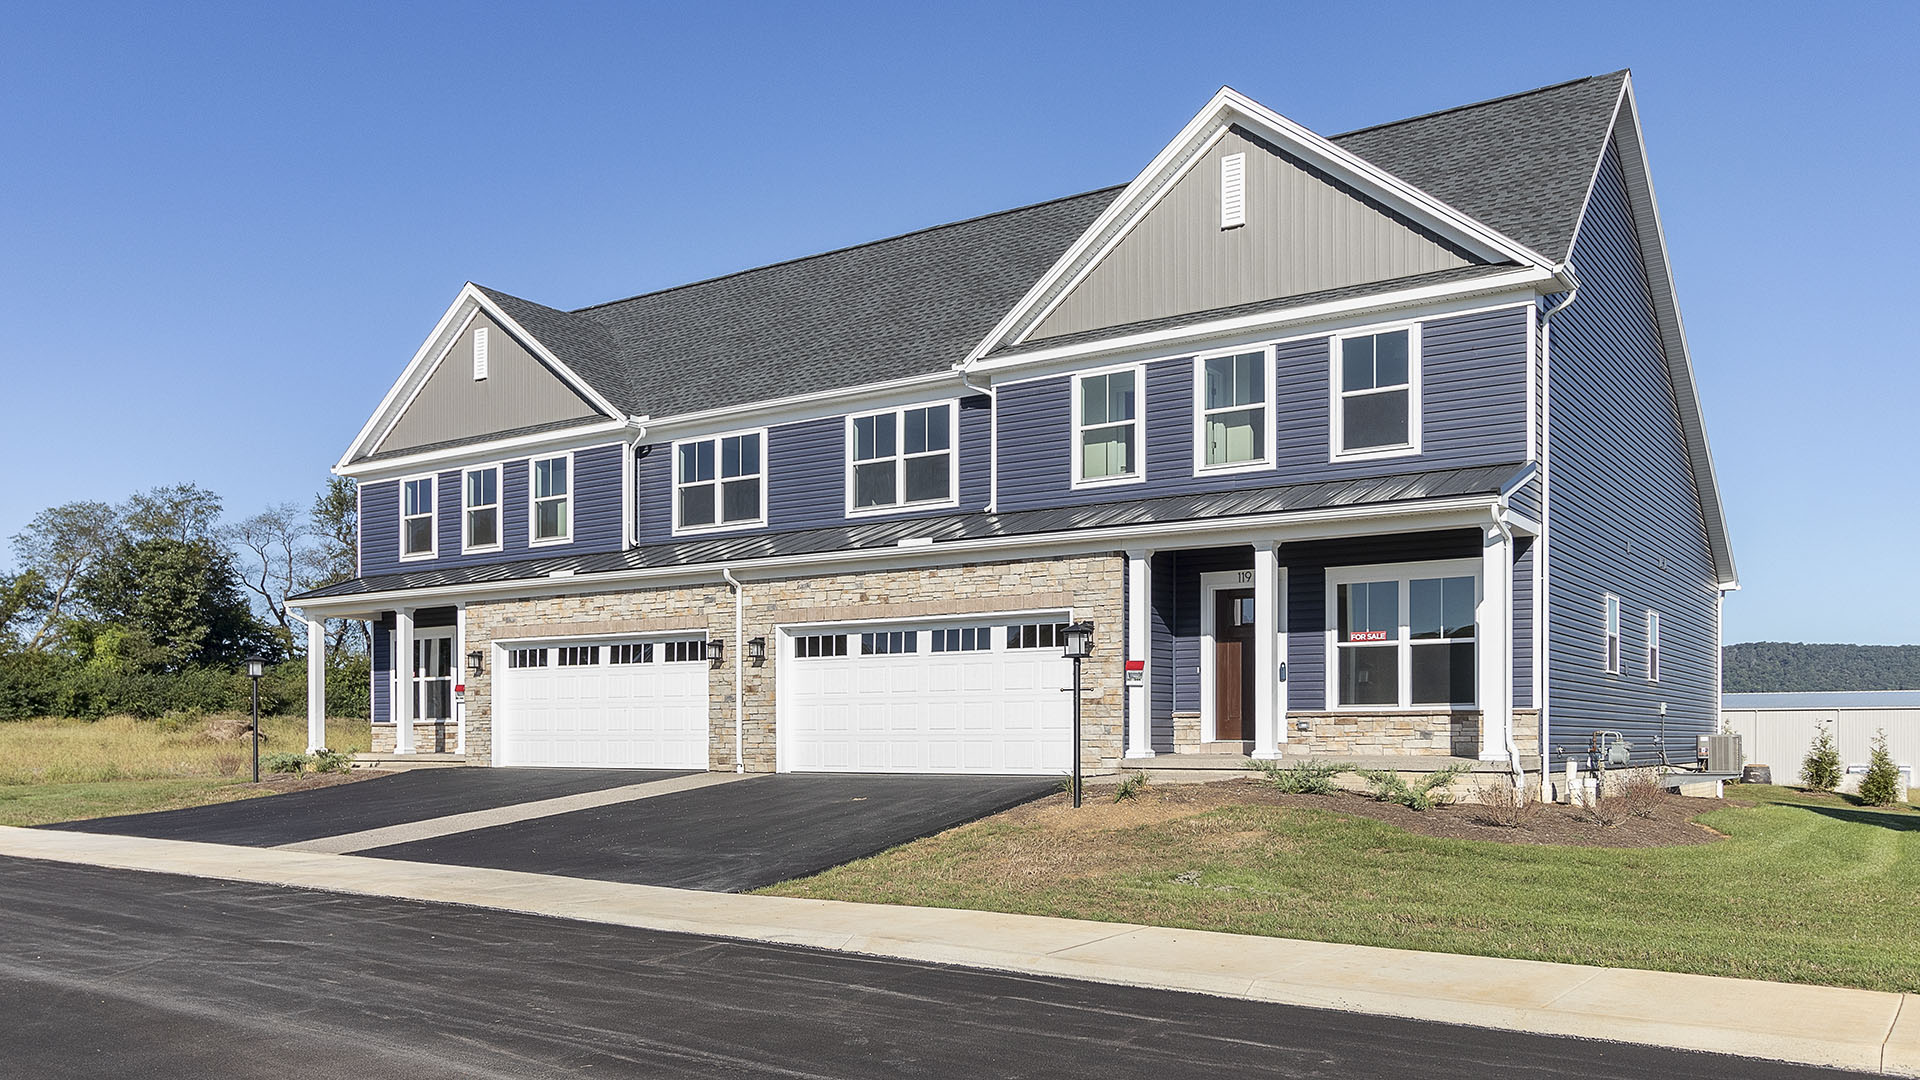 New Model Home Now Open at Kingston Village in State College